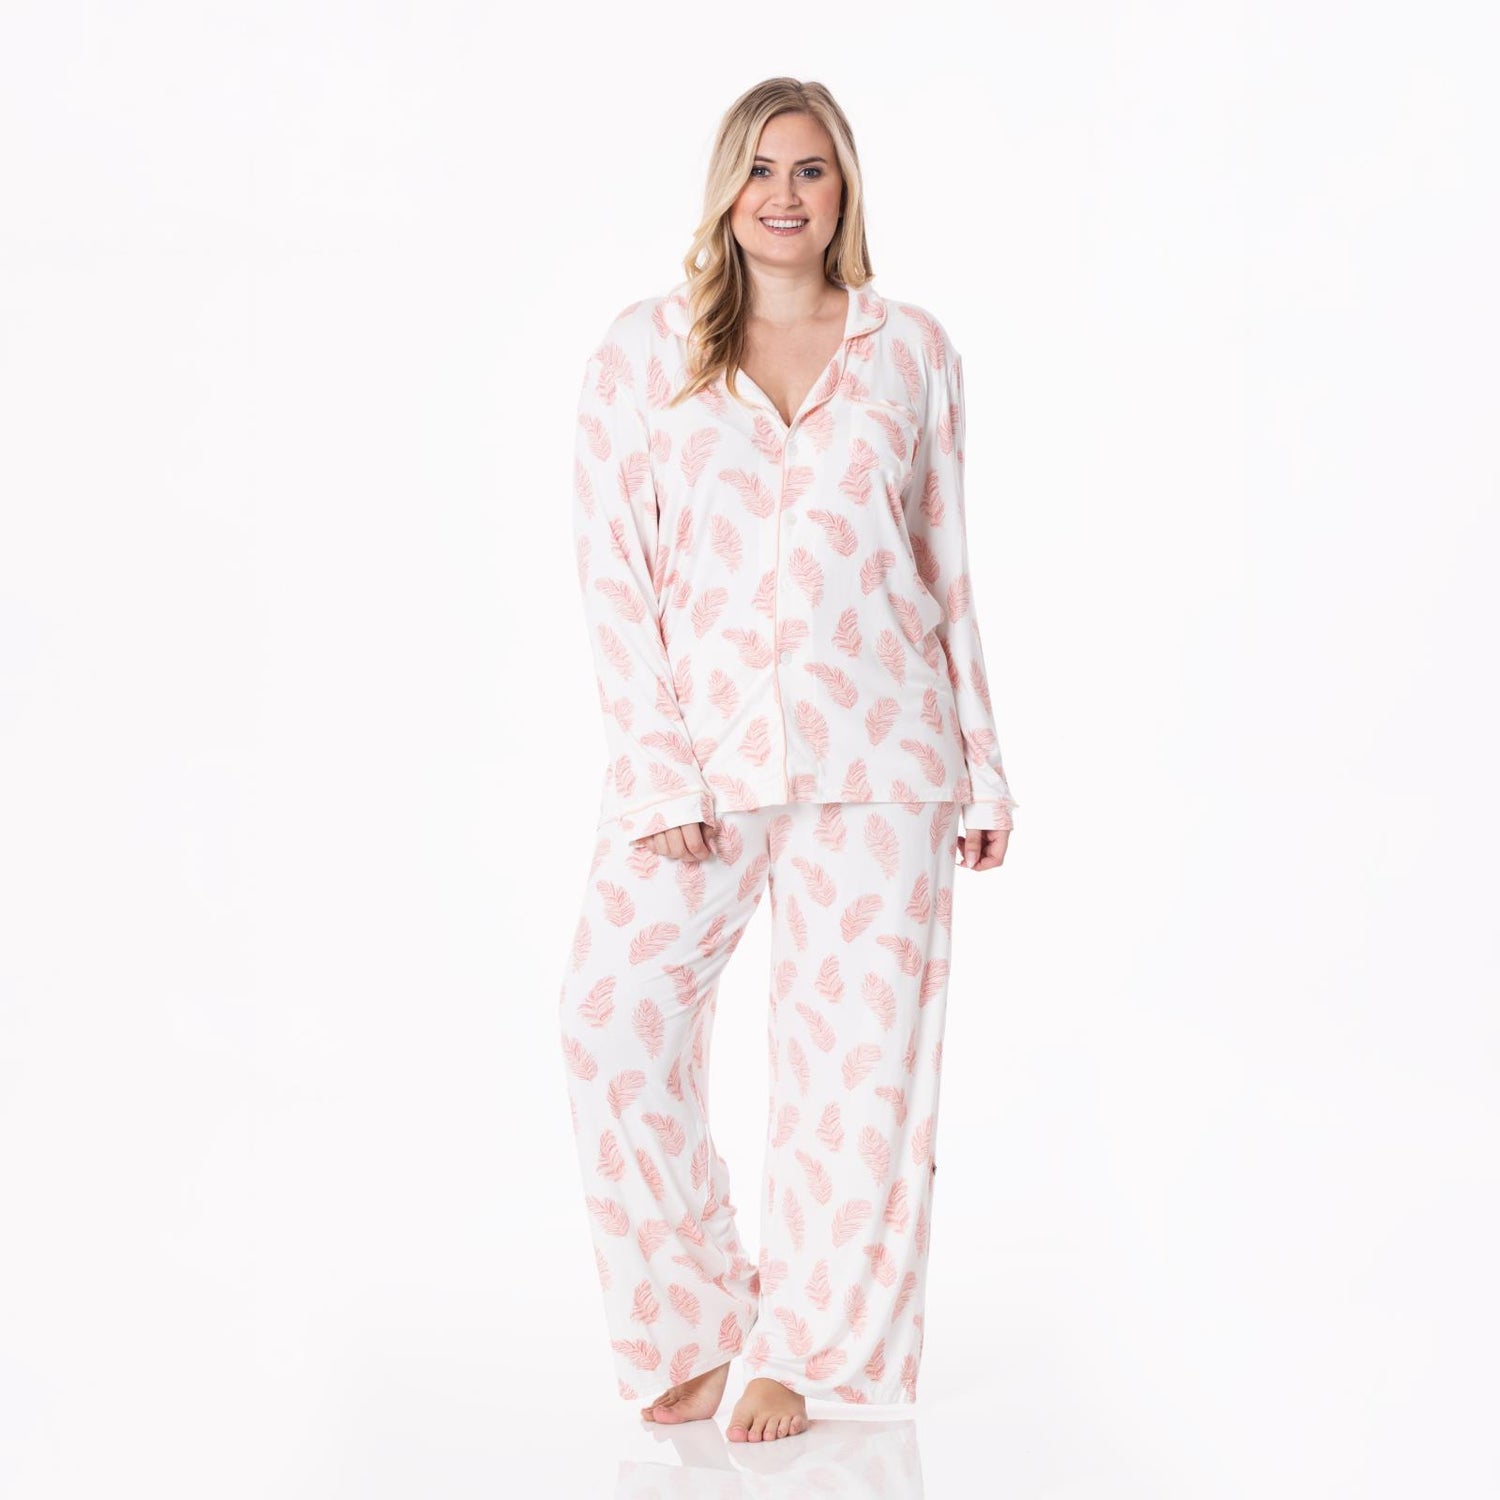 Women's Print Long Sleeve Collared Pajama Set in Natural Feathers